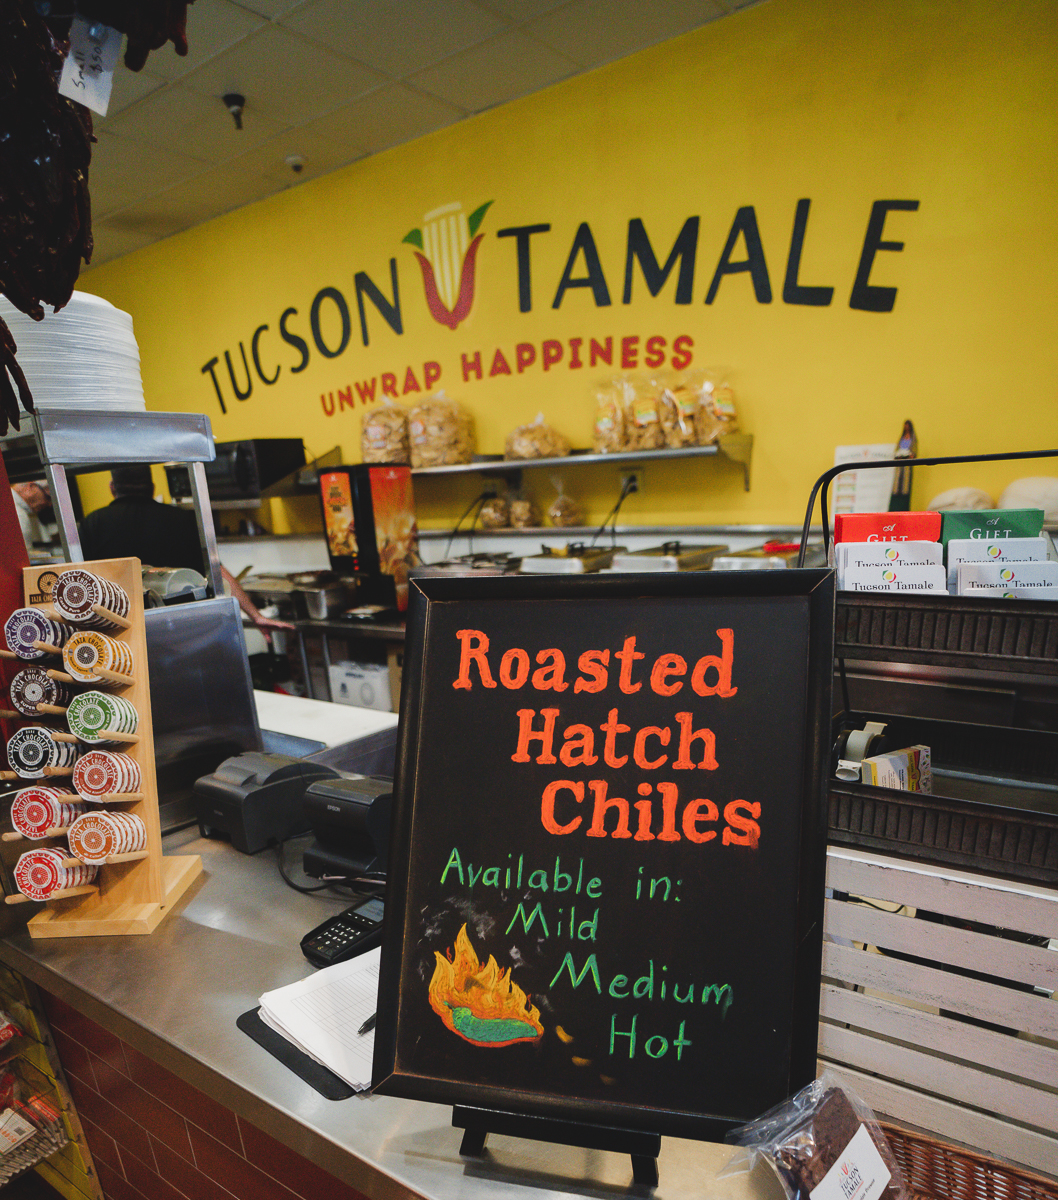 "Wall of Heat" at Tucson Tamale (Photo by Isaac Stockton)